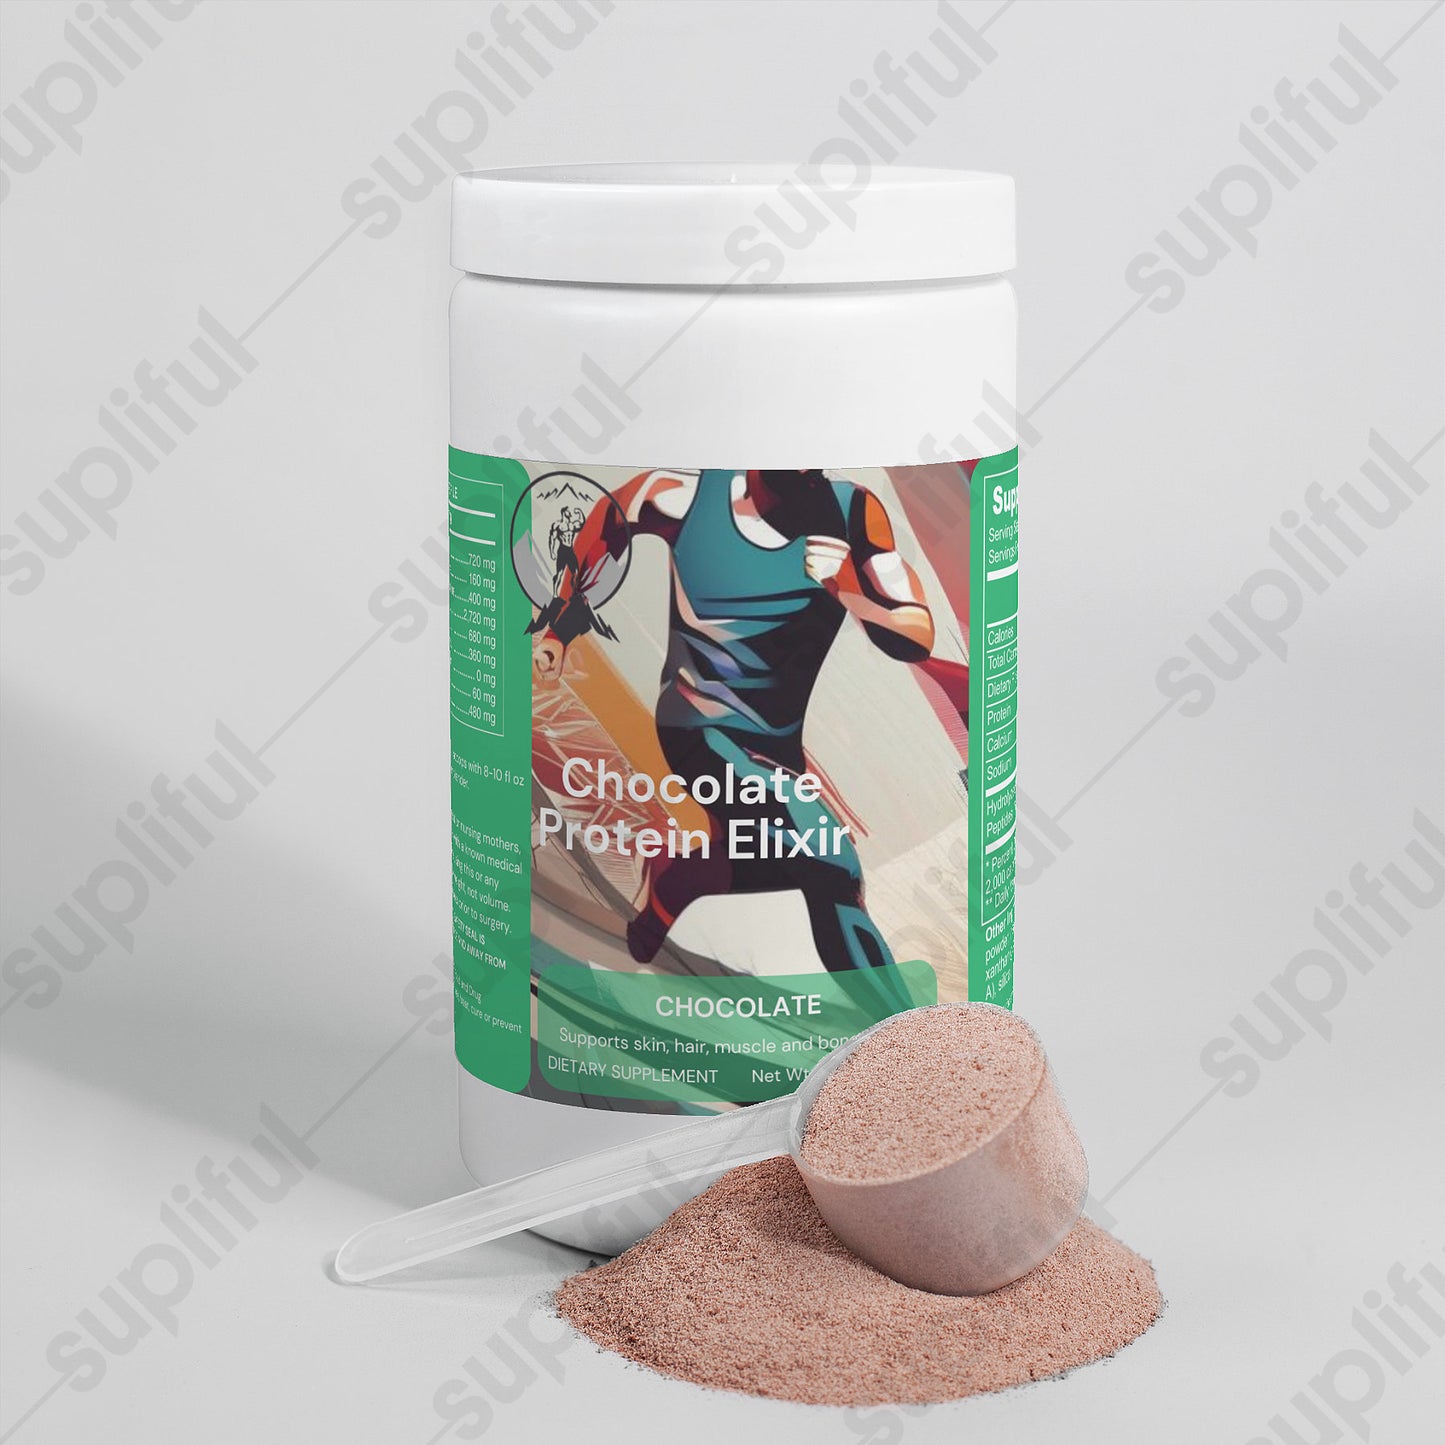 Chocolate Protein ElixirProteins & BlendsGrass-Fed Collagen Peptide Powder helps to maintain healthy bodily function. Collagen is an essential protein found mostly in connective tissue throughout the body. Chocolate Protein ElixirThe Rocky Ranger